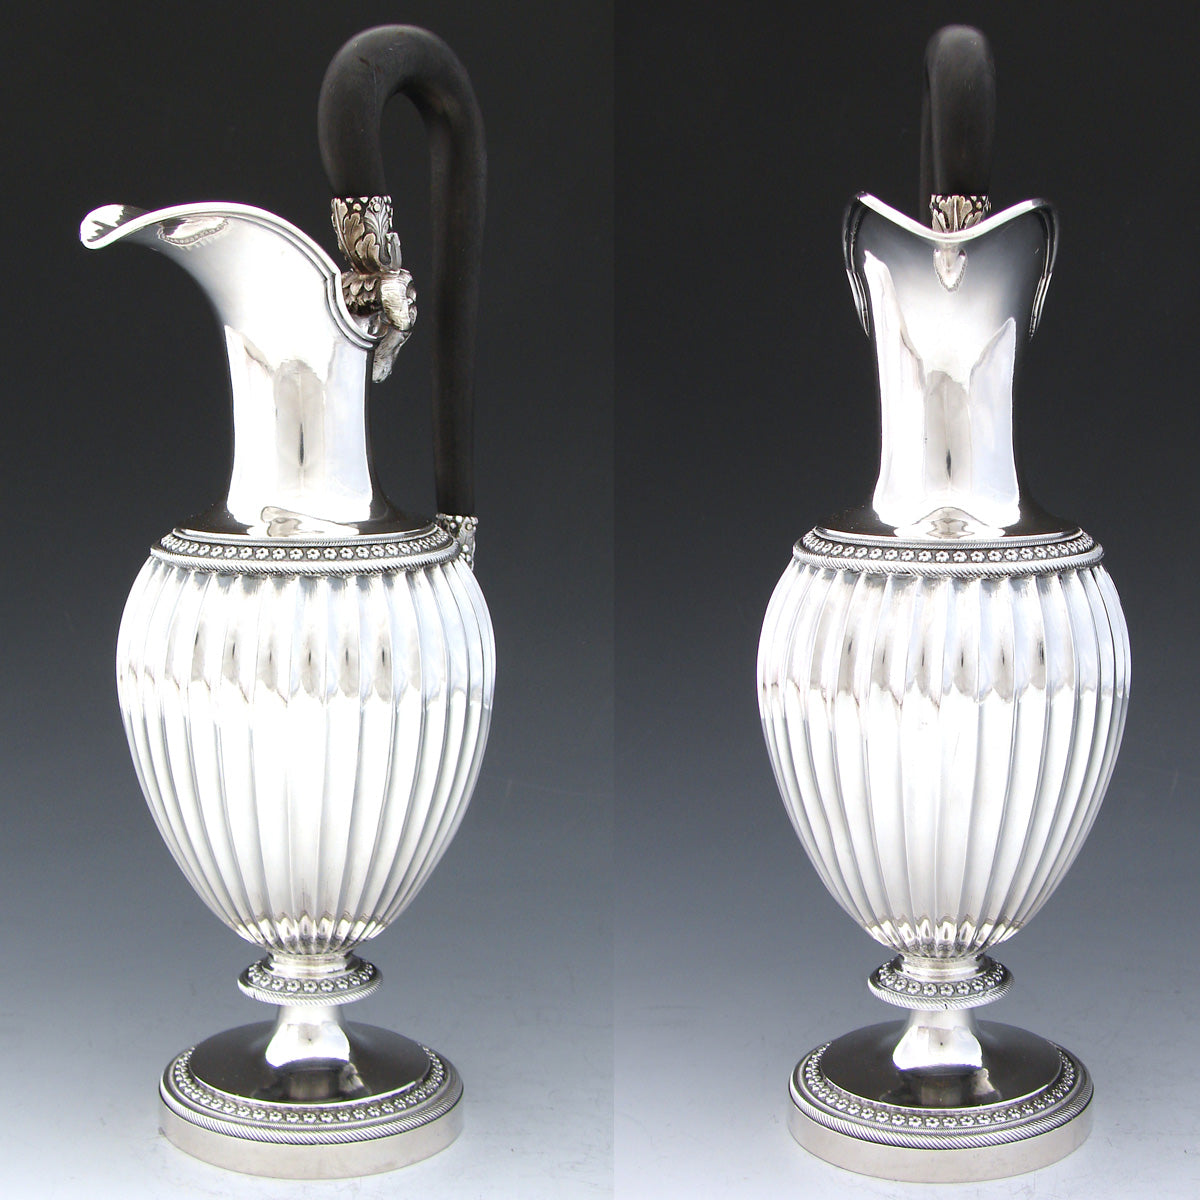 Antique French 1798-1809 Sterling Silver 14oz Ewer, Claret Jug, Empire Style Ram's Head & Ribbed Body